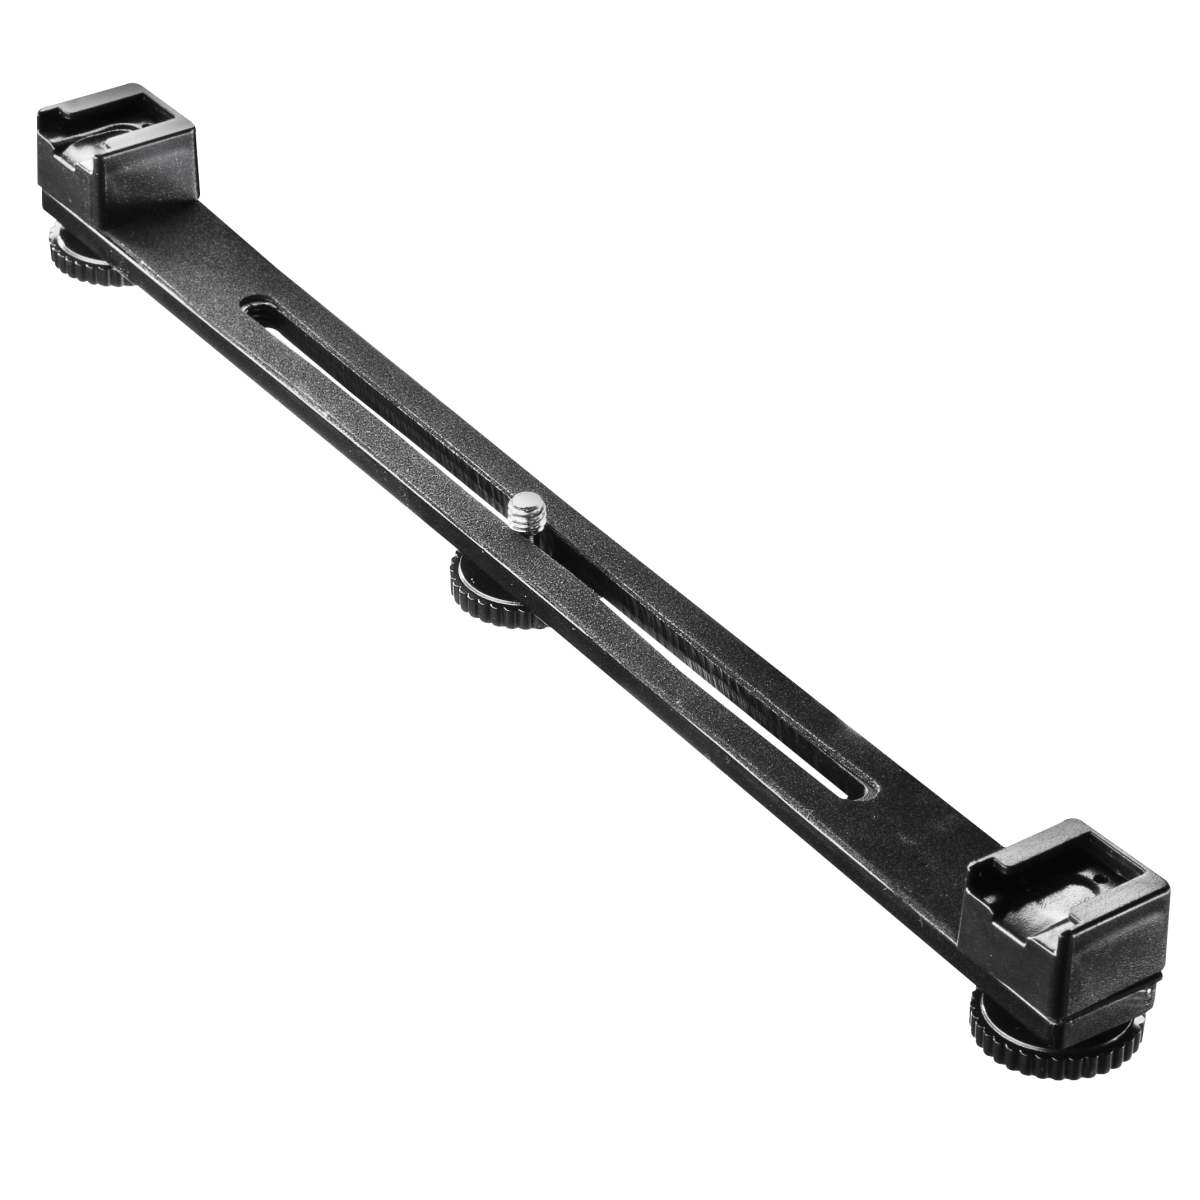 Walimex Auxiliary Bracket 2-fold for Video Light